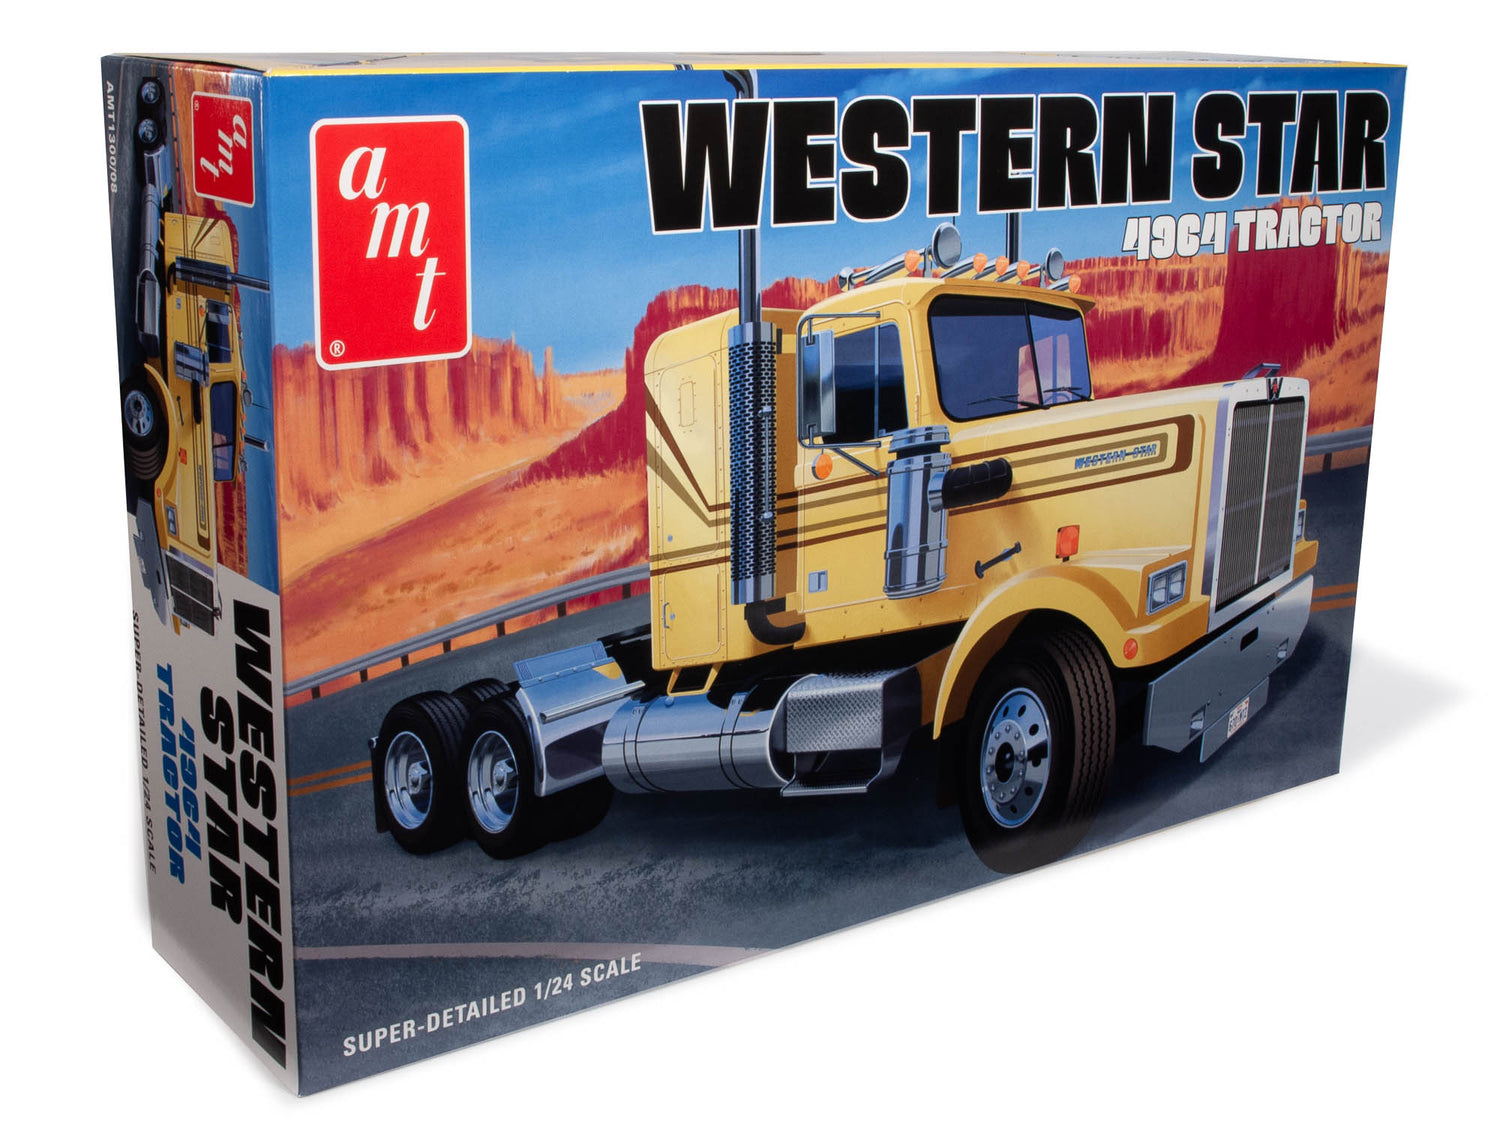 AMT Western Star 4964 Tractor 1:24 Scale Model Kit